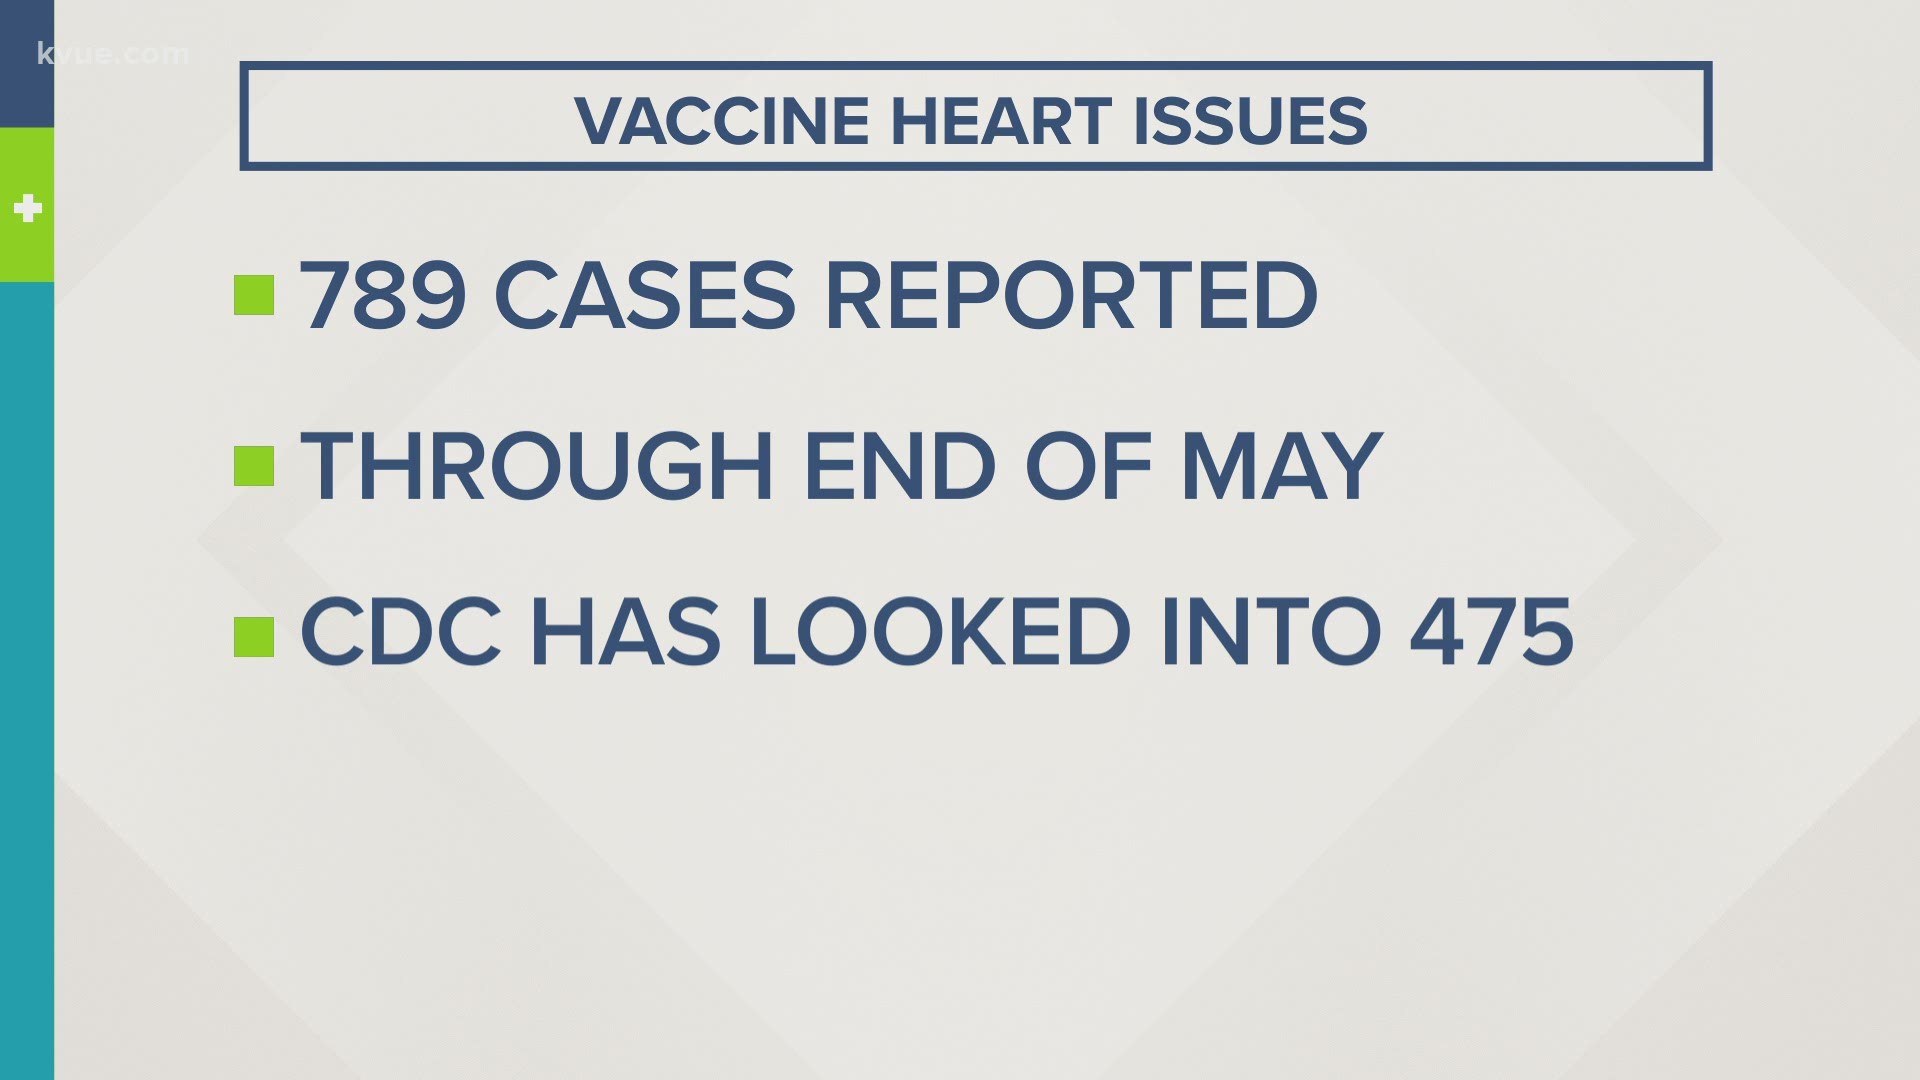 The CDC has released information on the problems reported by people who received the Moderna and Pfizer vaccine.